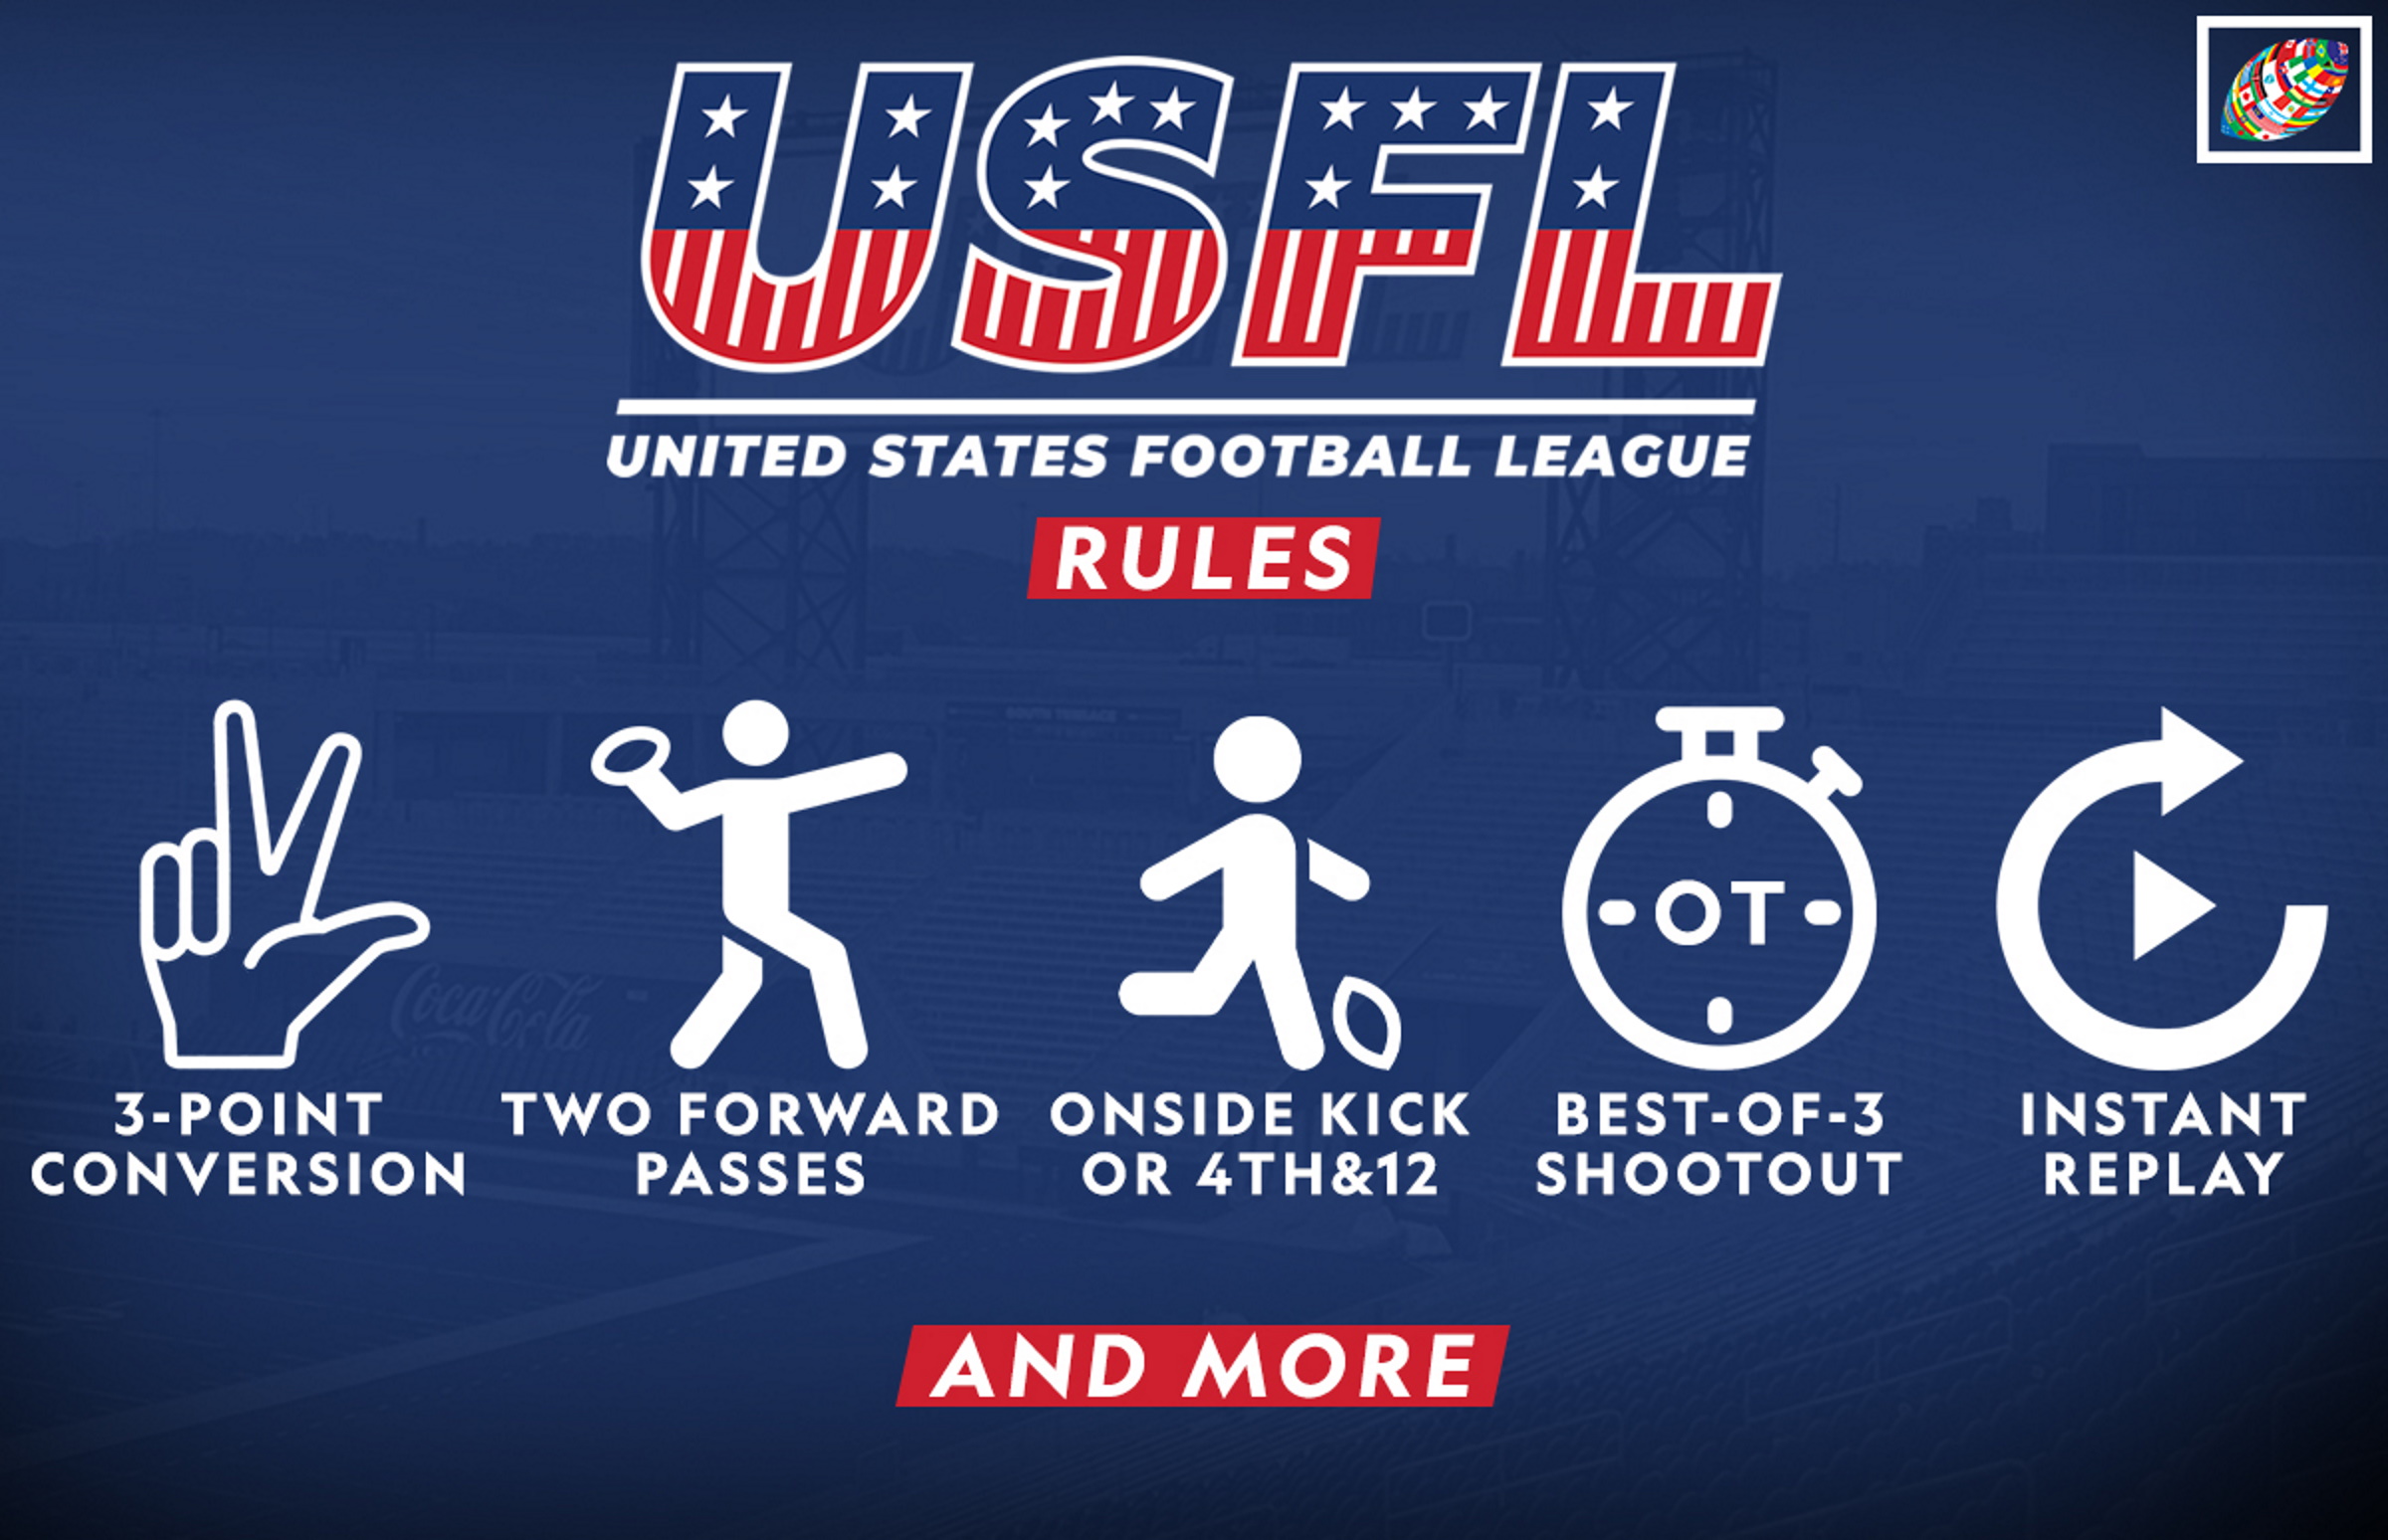 Old USFL Sues New USFL, Supplemental Draft, OT Rules and more